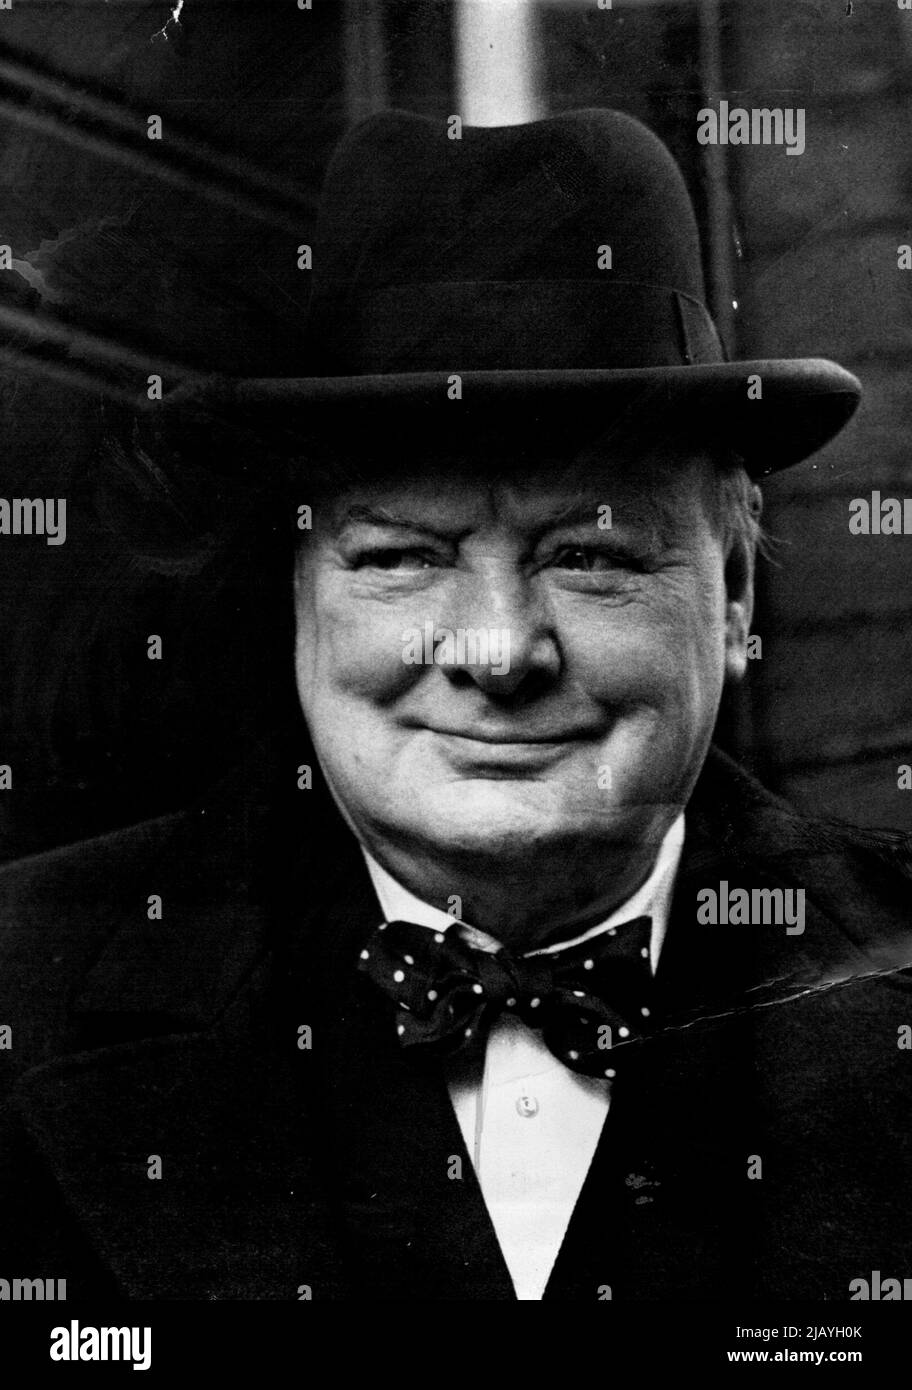 'Winner Election Day Smiles' Goes To Vote In Sth Kensington: Pictured as he leaves his Hyde Park Gate, London home to cast his personal vote, Mr. Winston Churchill wears a smile of confidence. Mr. Churchill who resides in the South Kensington constituency has Sir Patrick Spens as his Conservative candidate. February 23, 1950. (Photo by Fox Photos). Stock Photo